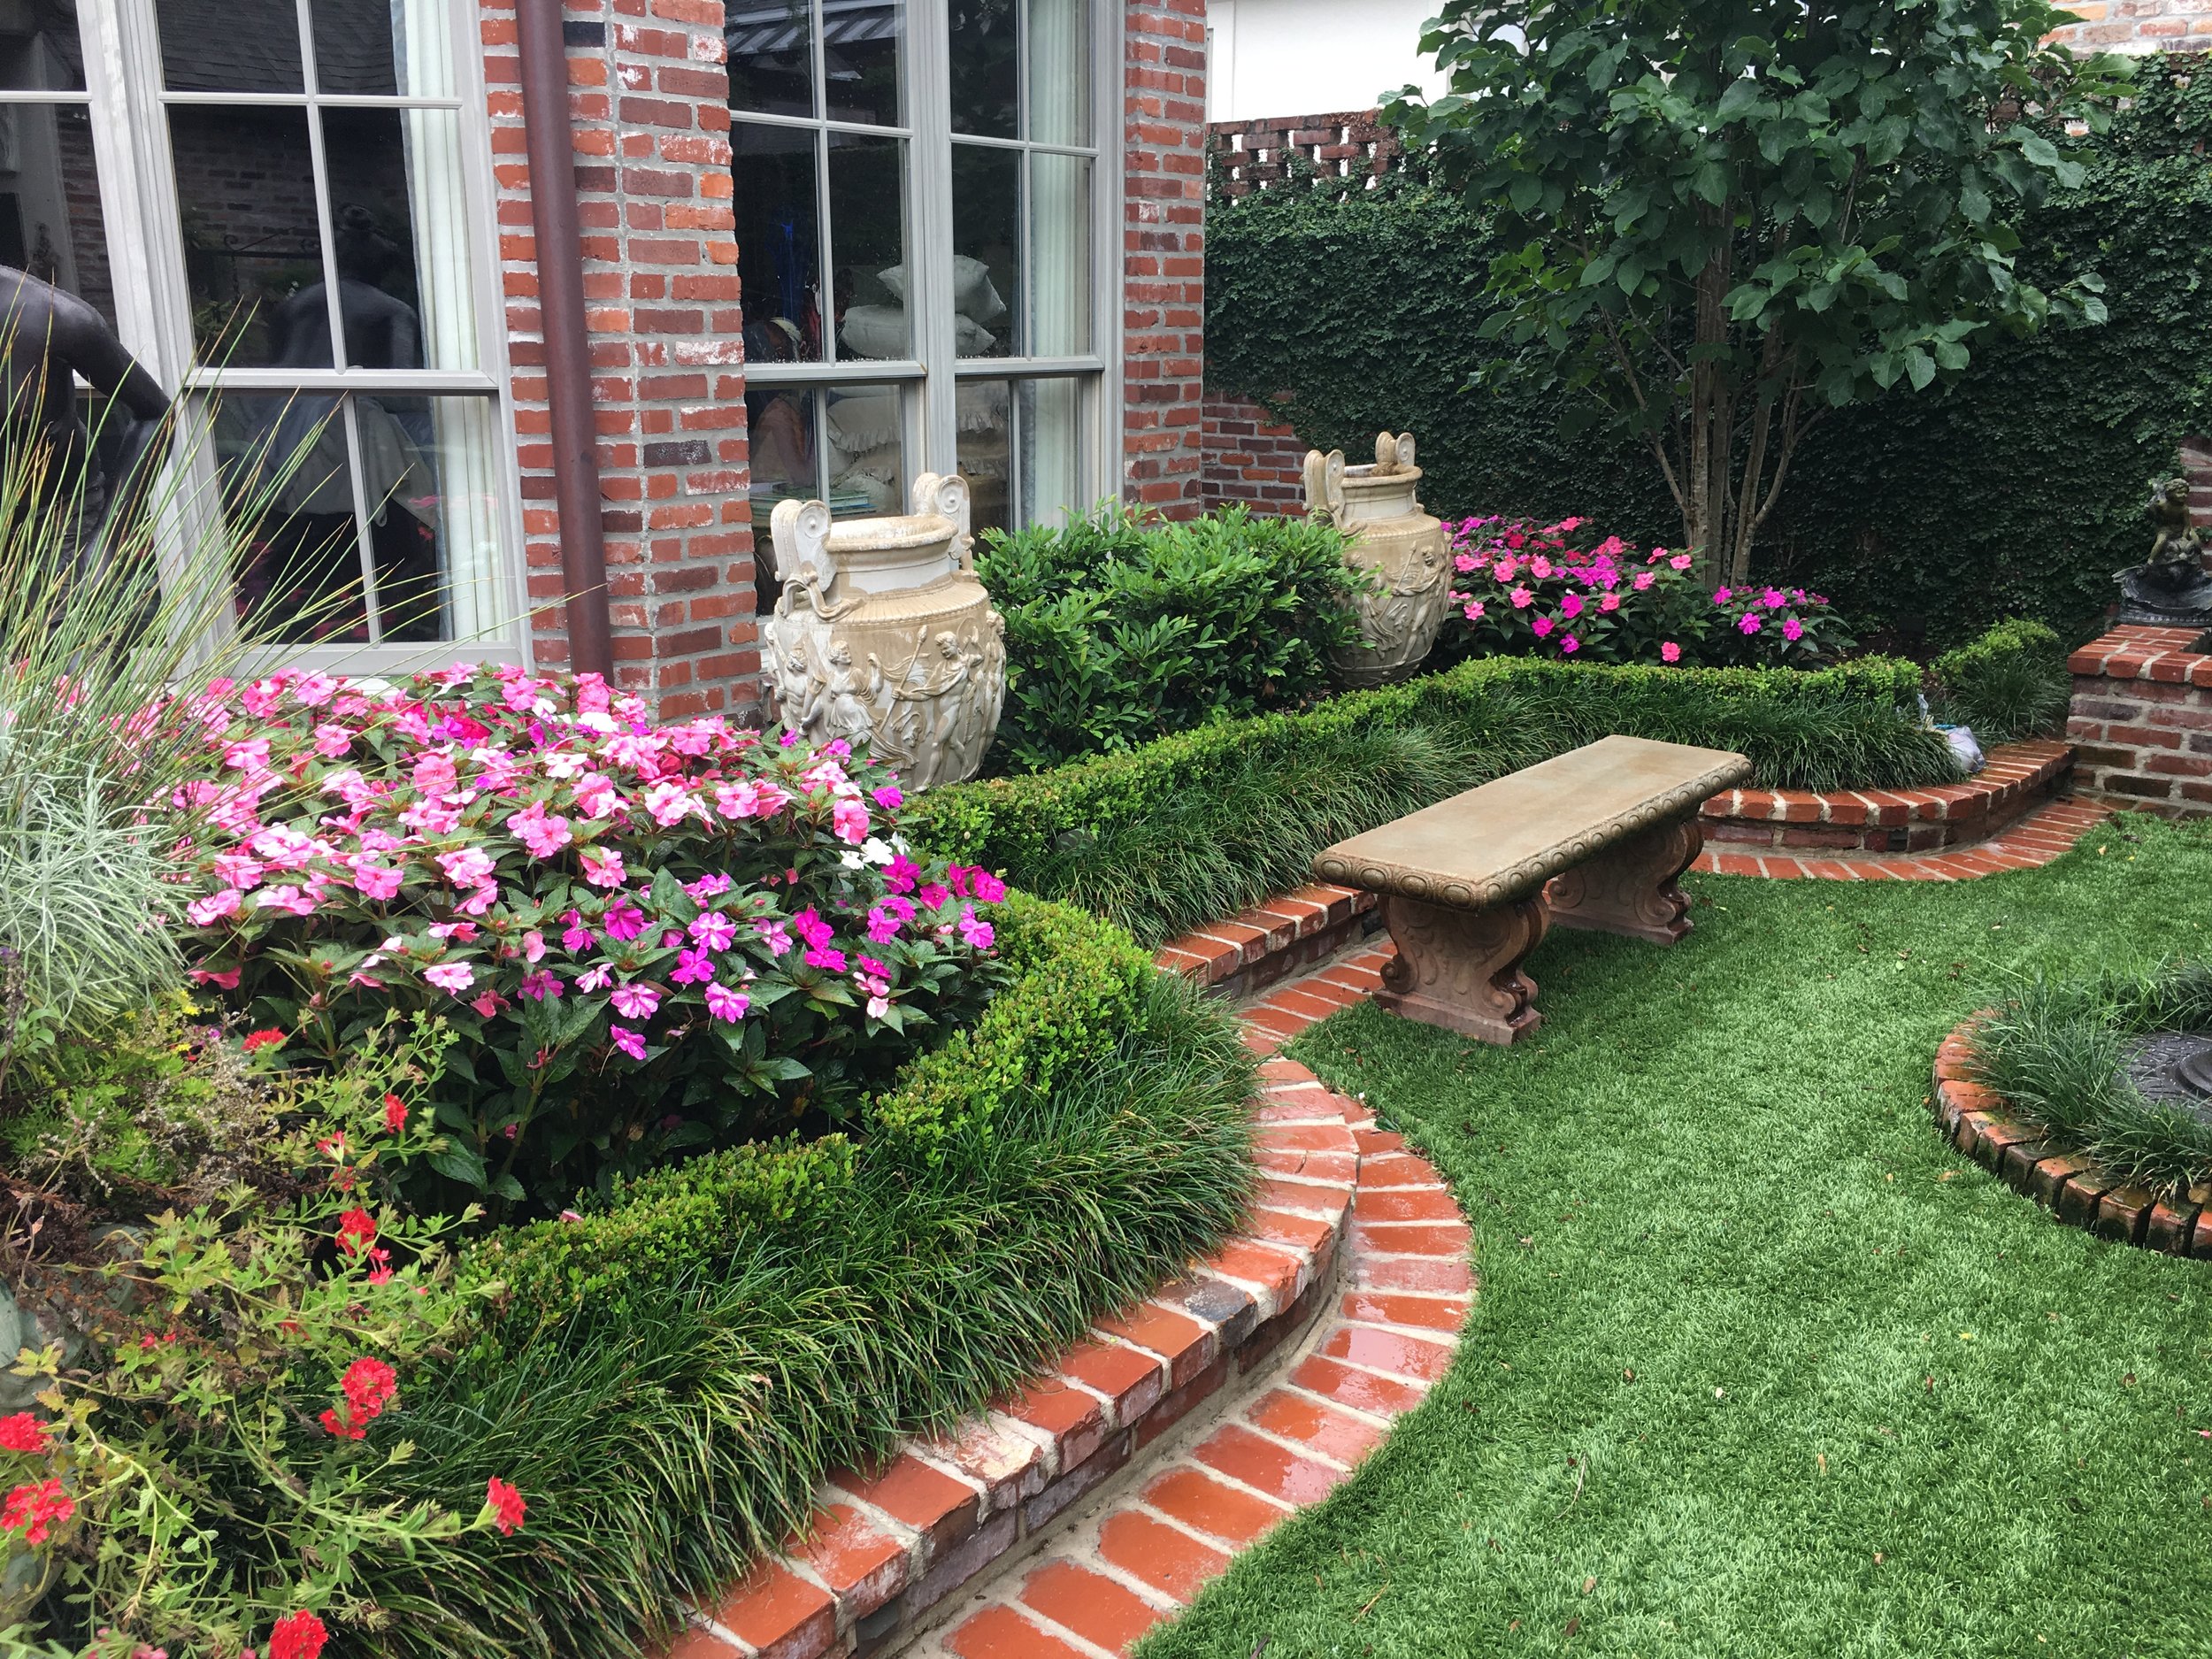 Professional Landscaping Services in Indianapolis & Nearby